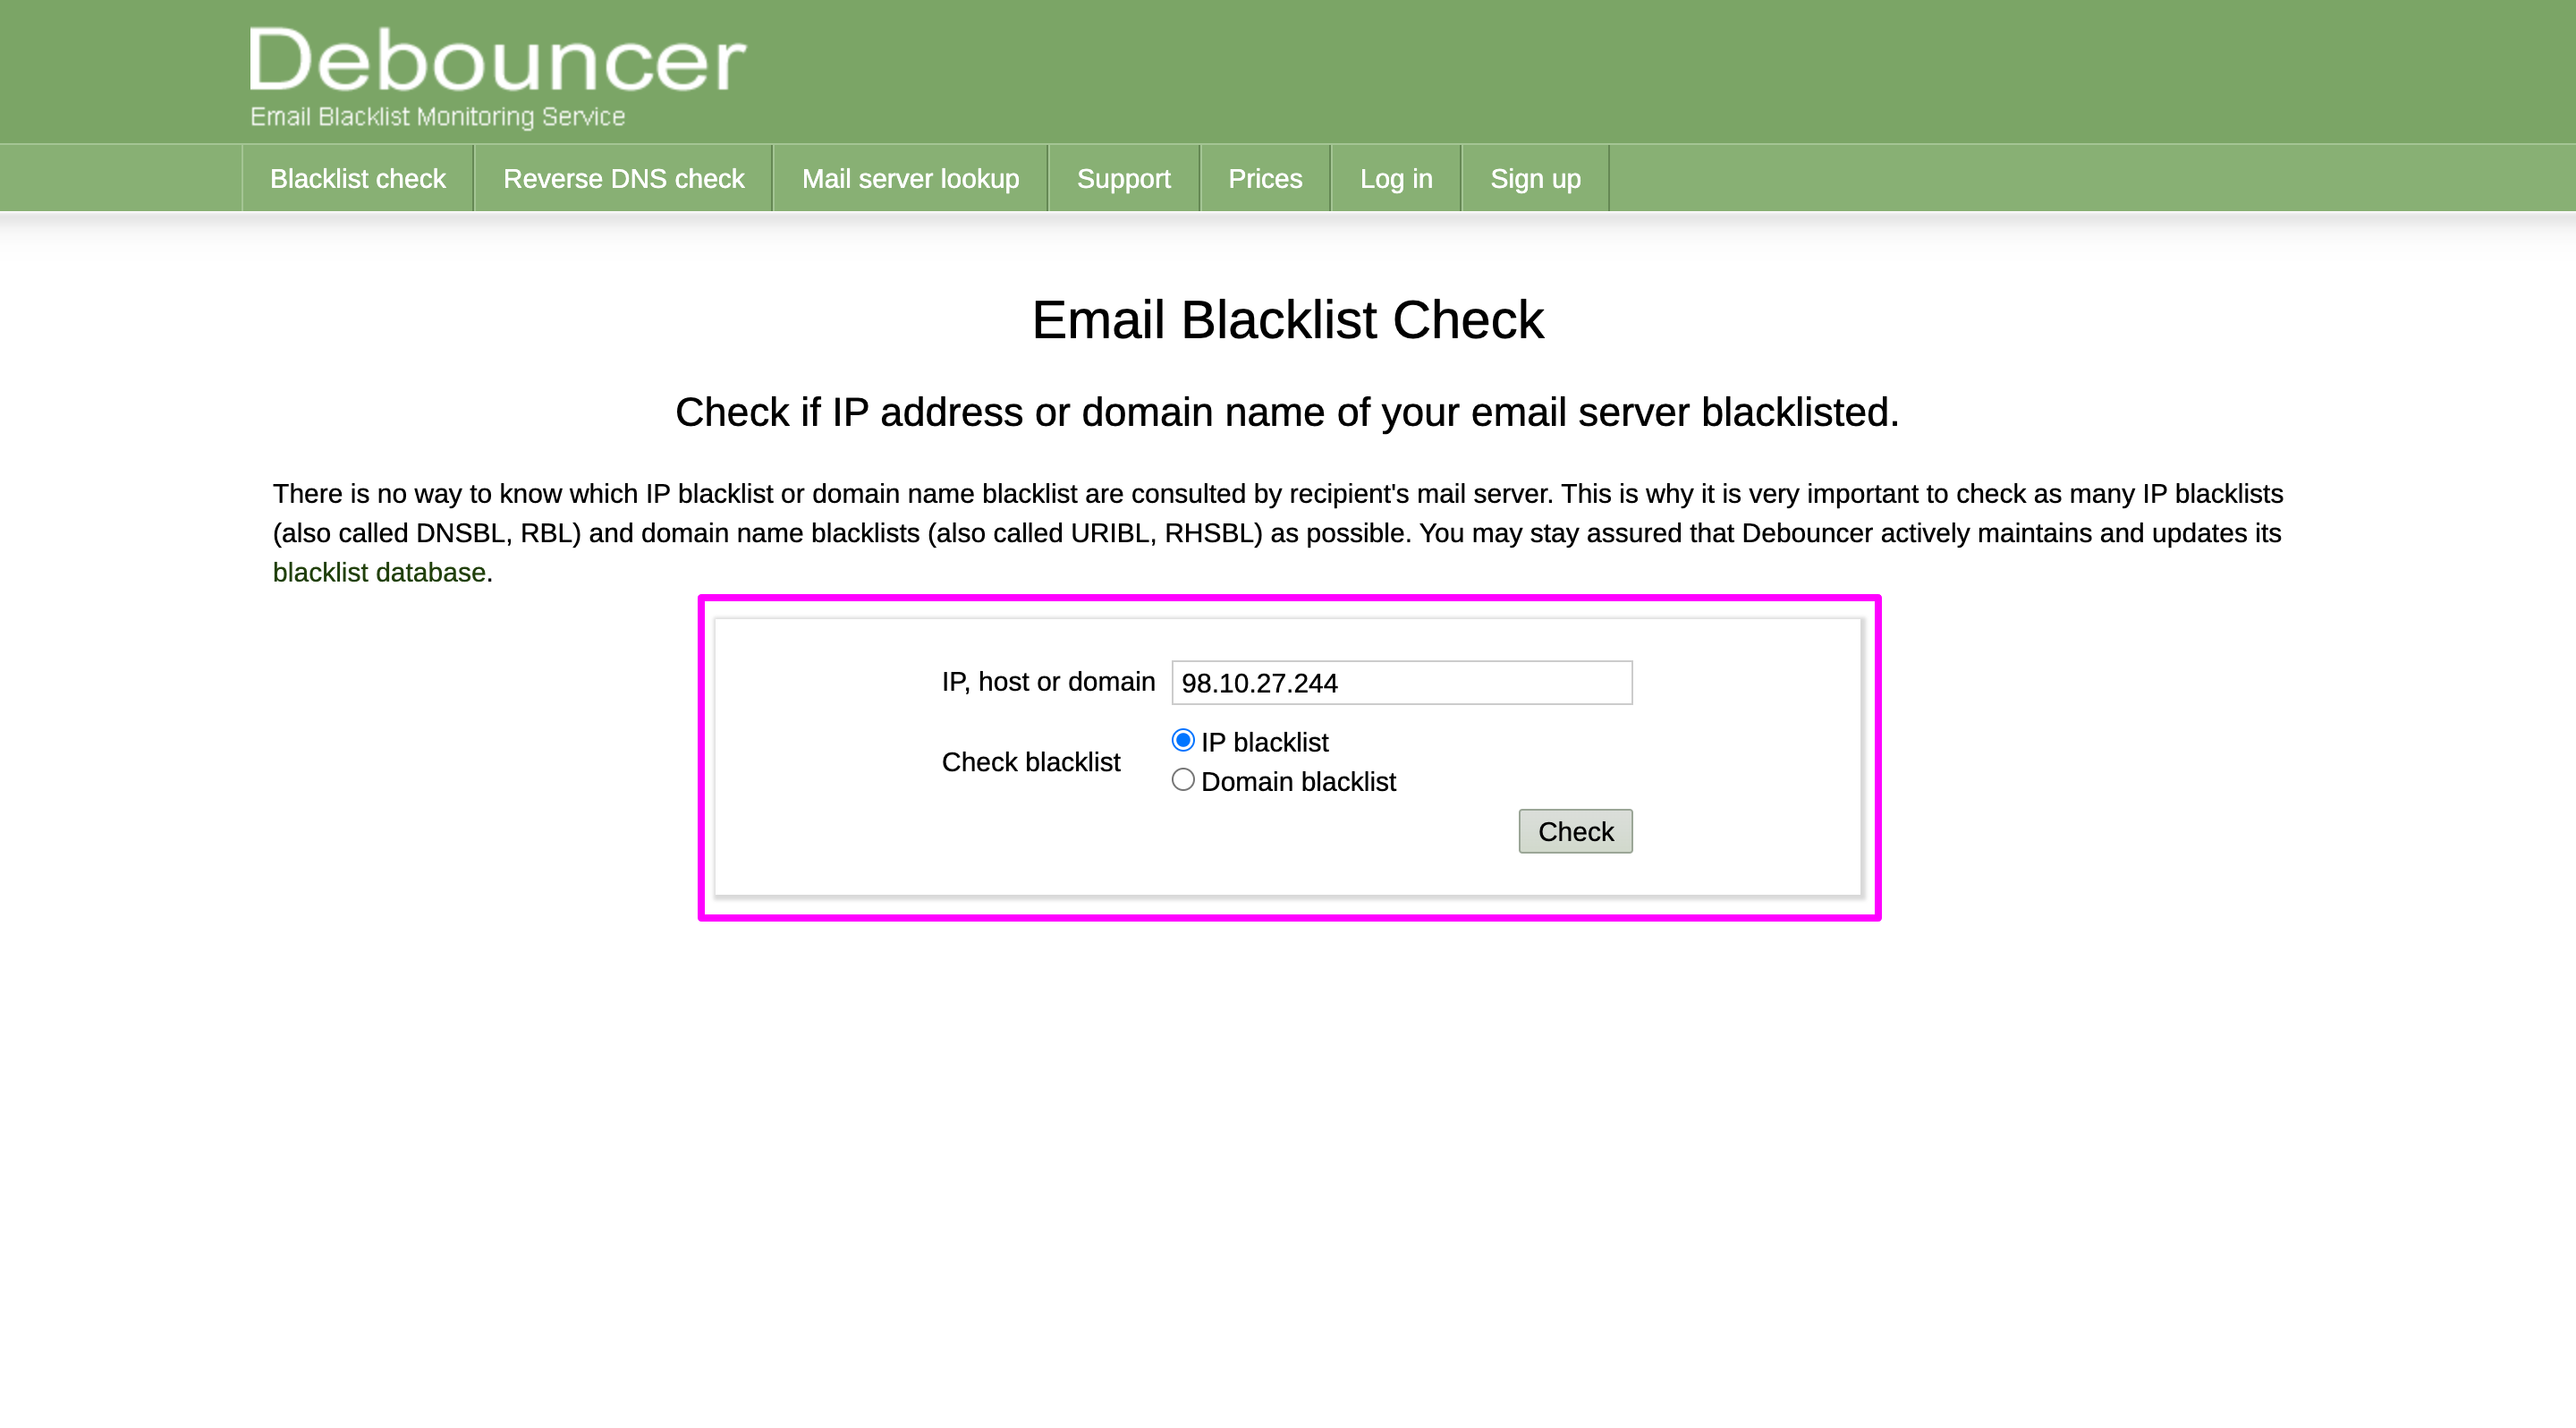 Using Debouncer, checking the blocklist for both the IP address and domain name.